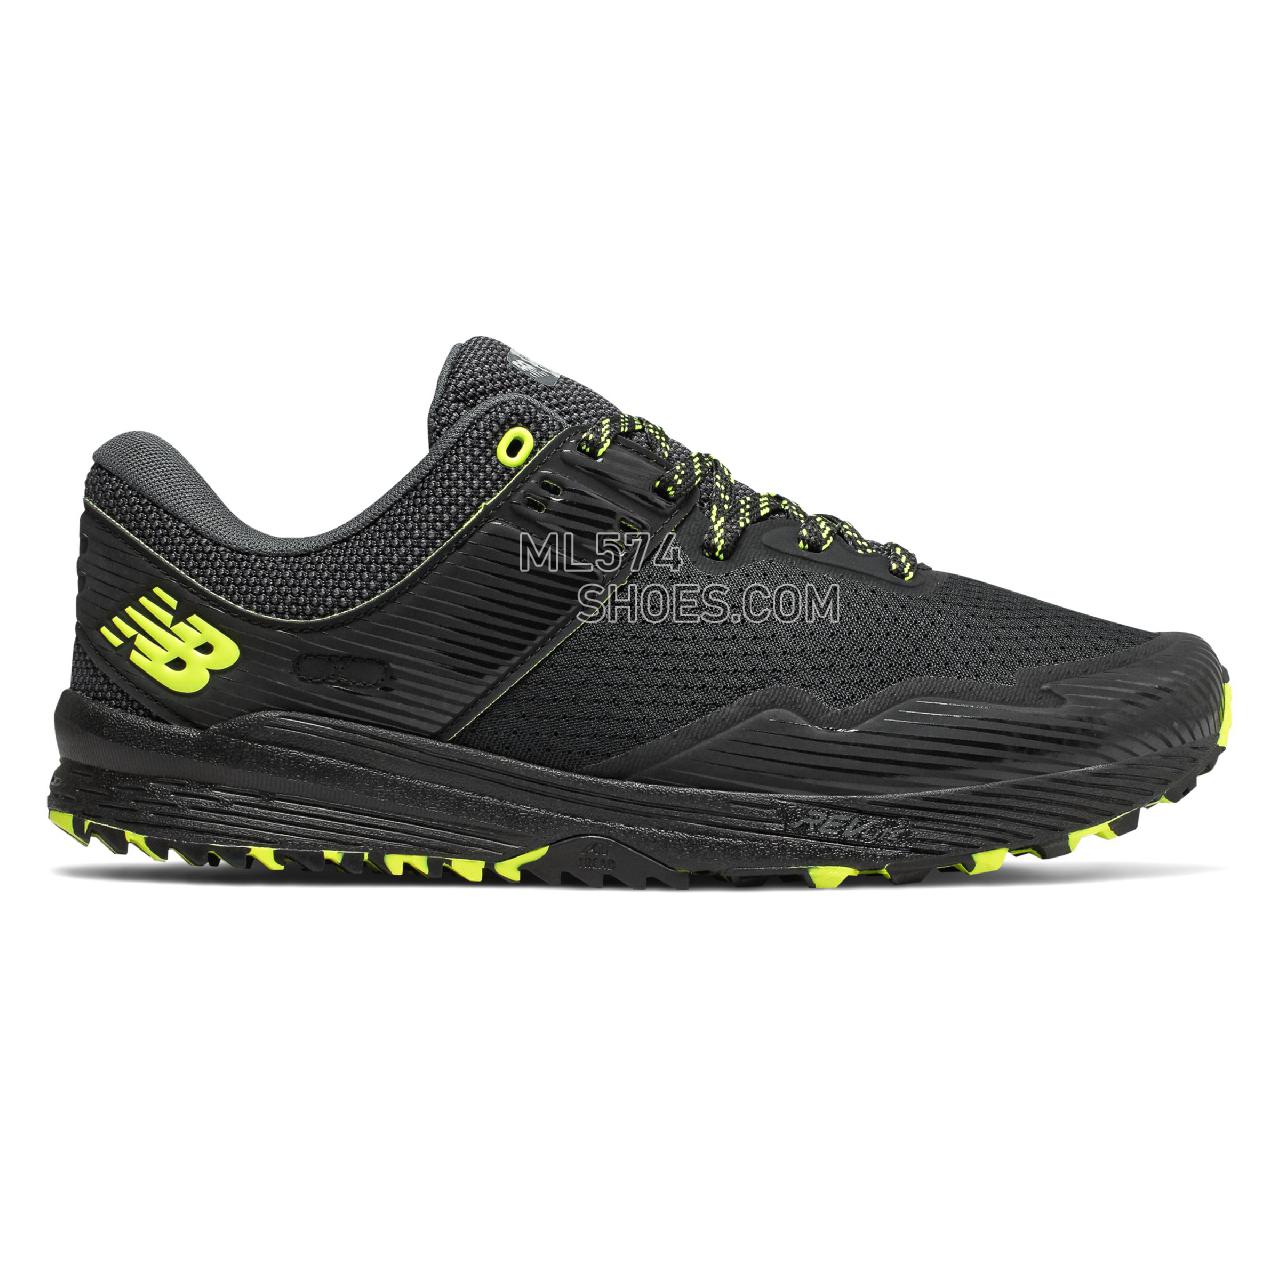 New Balance FuelCore NITRELv2 - Men's 2 - Running Black with Magnet and Hi-Lite - MTNTRLB2